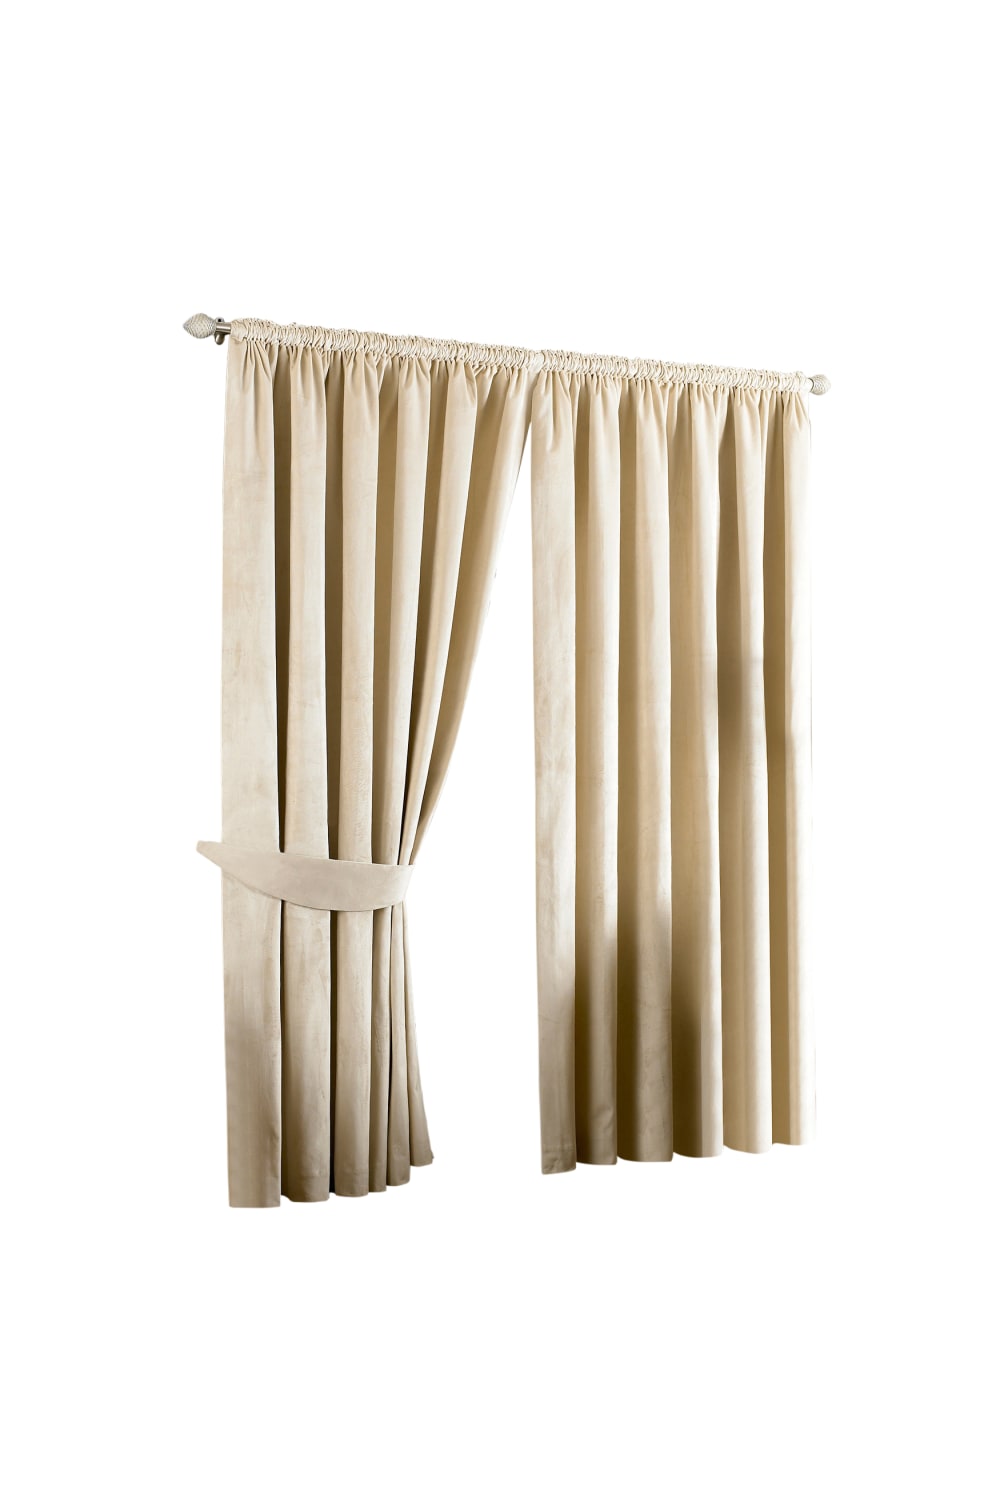 Riva Home Imperial Pencil Pleat Curtains (Cream) (90 x 72 inch)